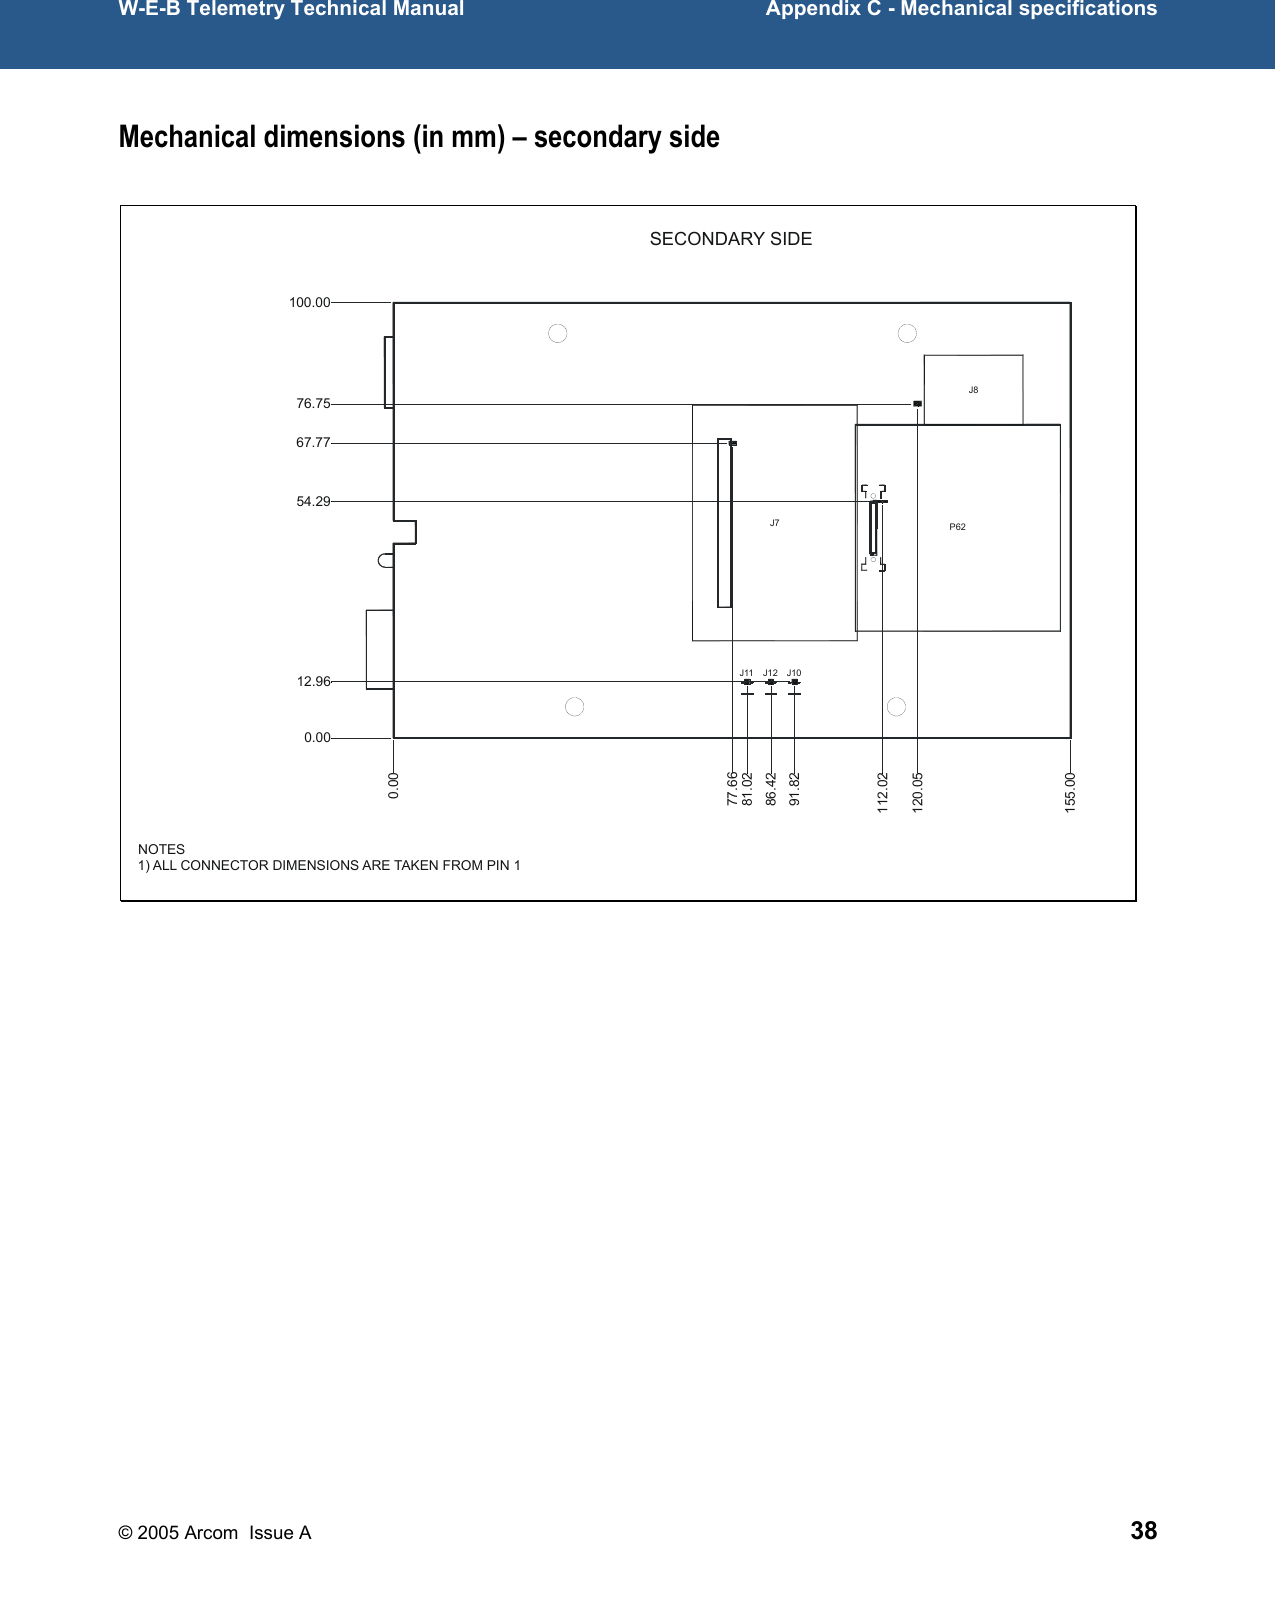  W-E-B Telemetry Technical Manual  Appendix C - Mechanical specifications Mechanical dimensions (in mm) – secondary side J7J8J10J11 J12P62NOTES1) ALL CONNECTOR DIMENSIONS ARE TAKEN FROM PIN 1SECONDARY SIDE0.00155.0081.0286.4291.82112.02120.0577.660.00100.0012.9667.7776.7554.29 © 2005 Arcom  Issue A 38 